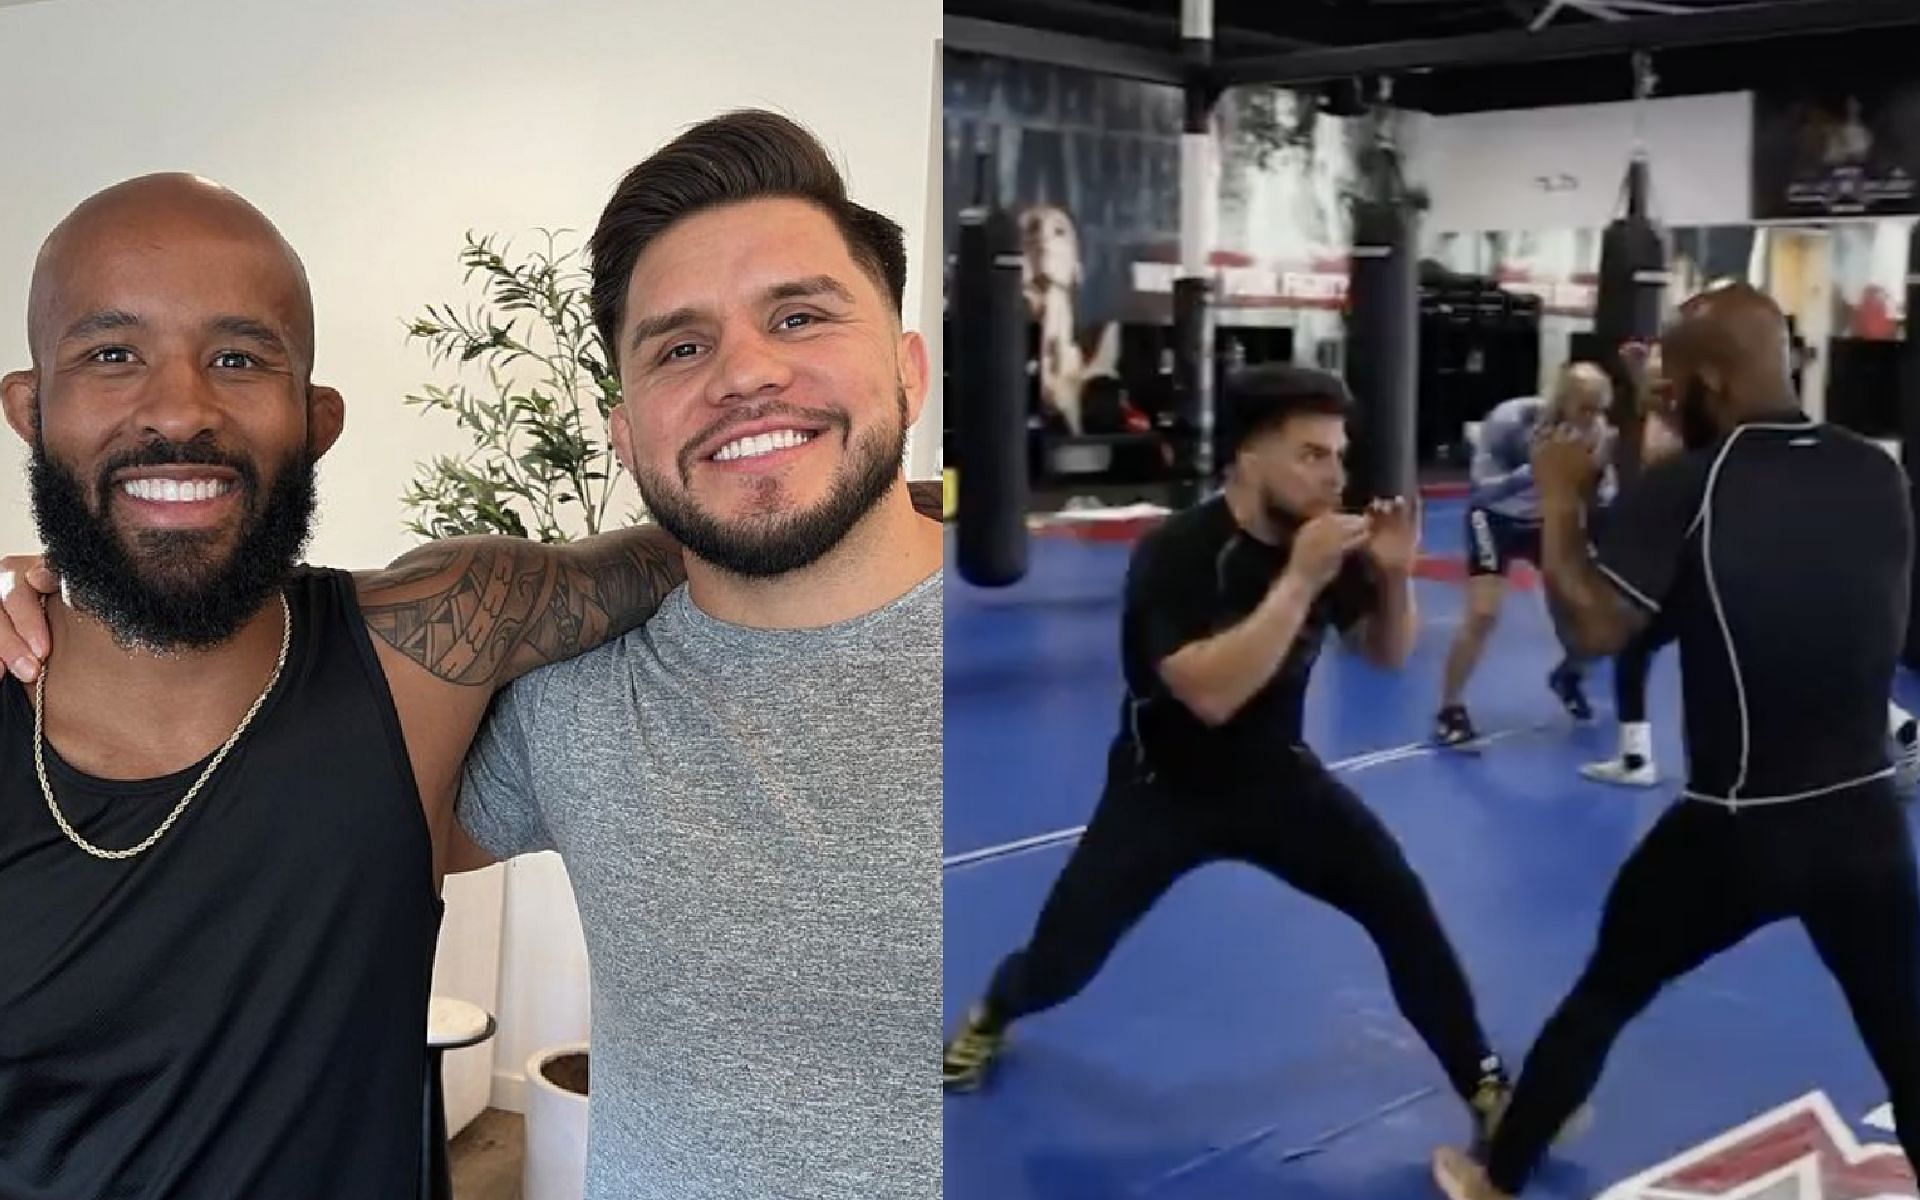 Demetrious Johnson (left) and Henry Cejudo (right) train together ahead of ONE 161. [Photos Demetrious Johnson Instagram, Henry Cejudo Instagram]